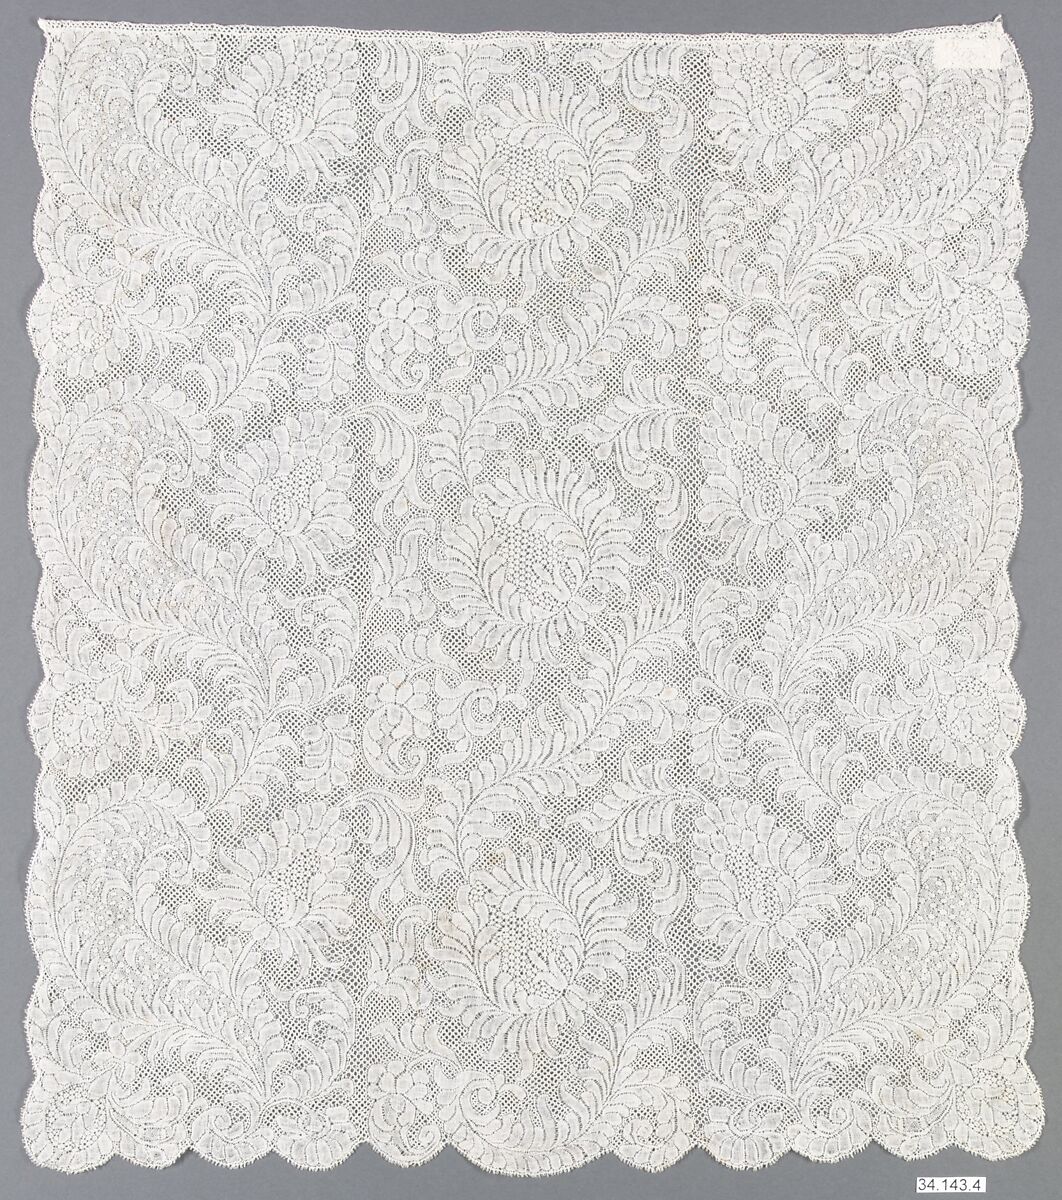 Cravat (one of a pair), Bobbin lace, French 